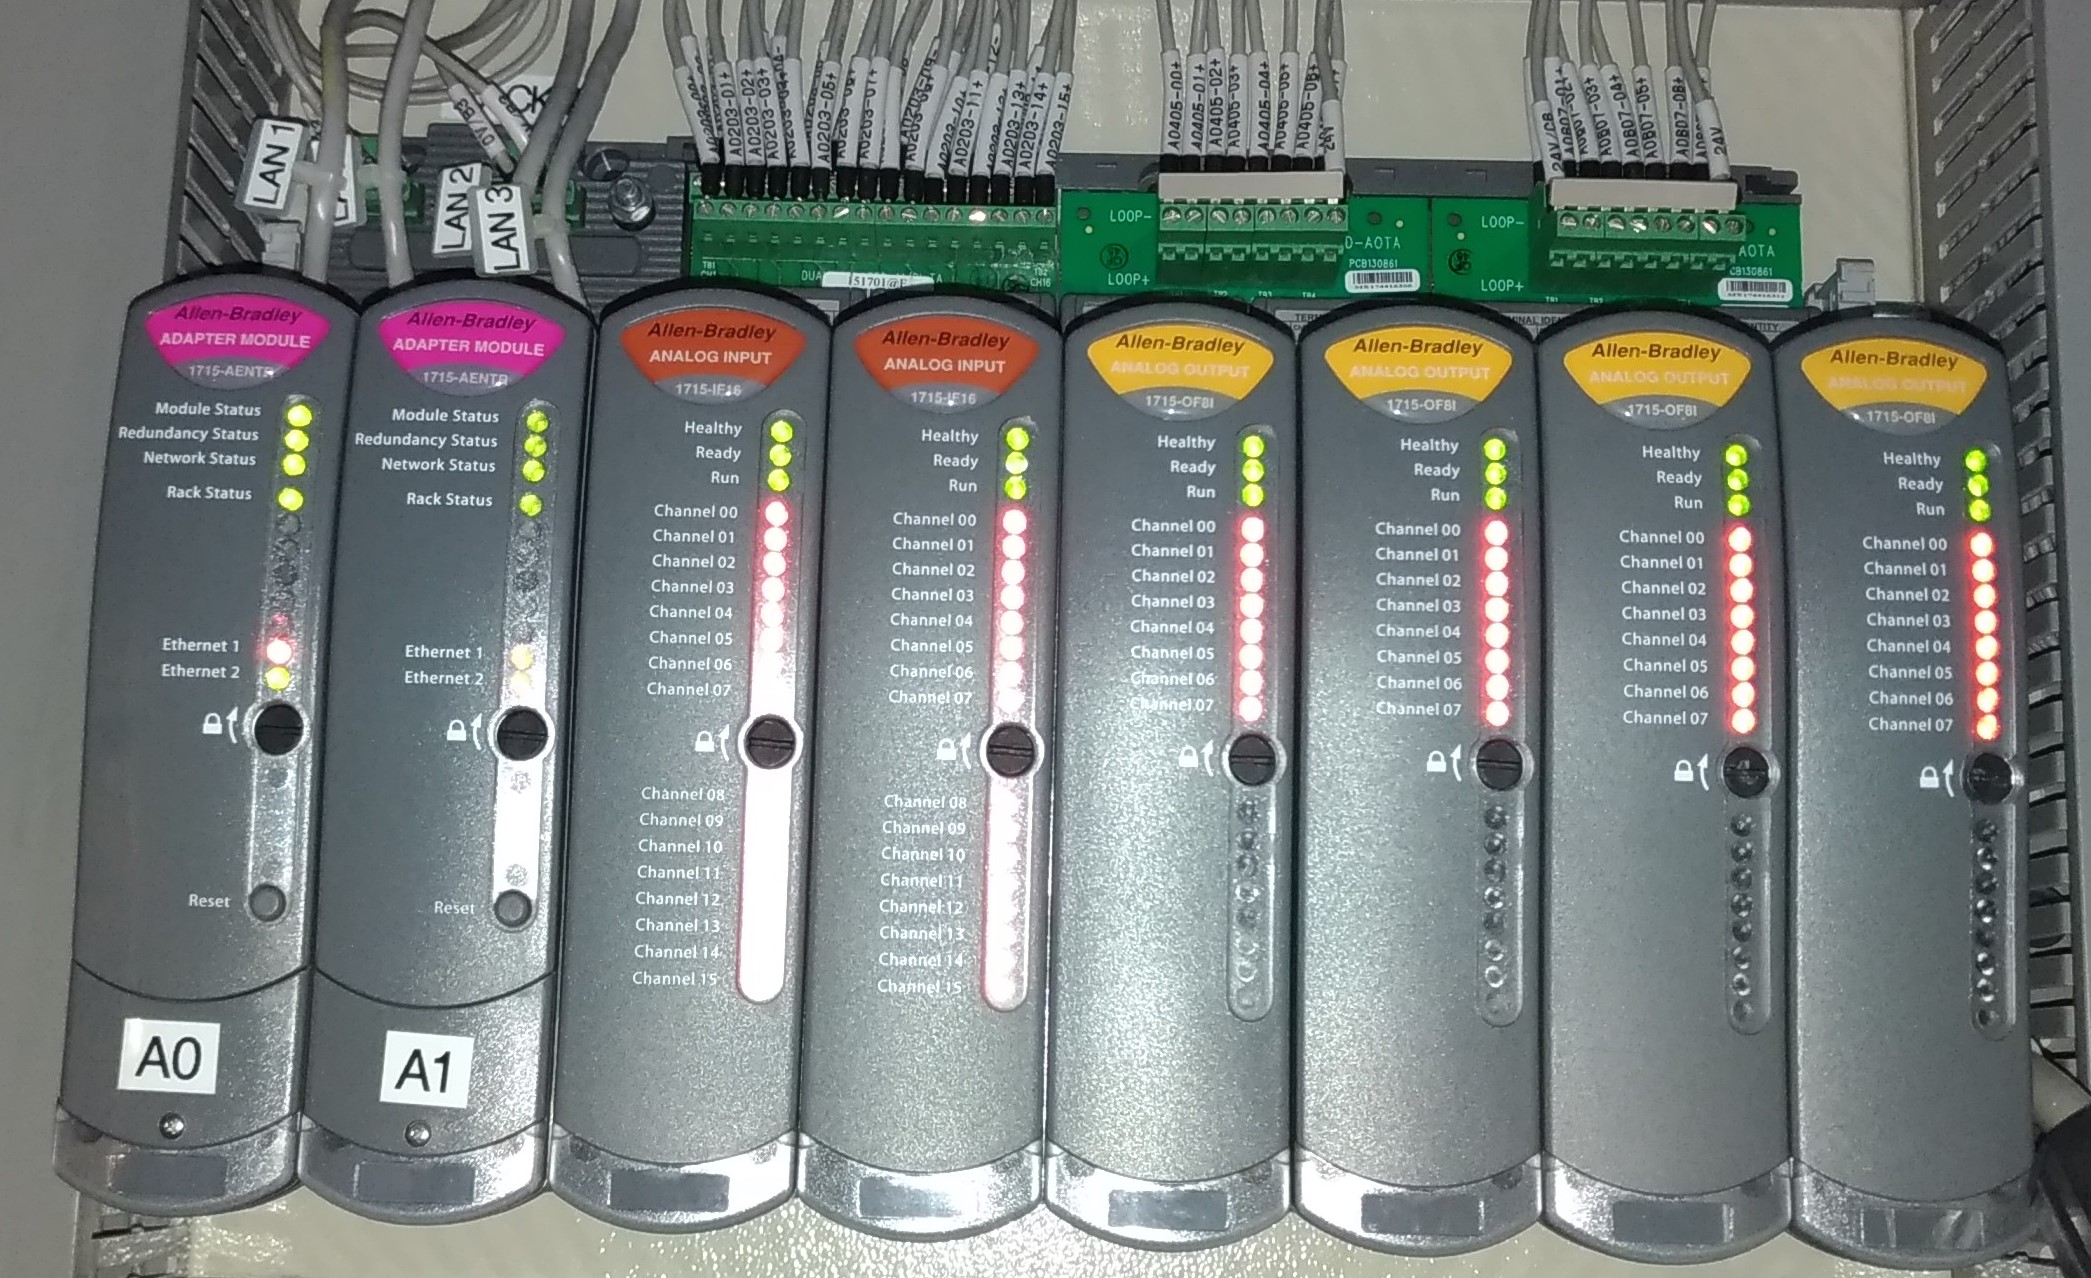 Close-up of Installed Redundant Ethernet Adapter (Pink Label) / Analogue Input (Orange Label)/ Analogue Output (Yellow Label) Modules inside the new PLC Panel After Works in DSD Stanley STW (Typical)